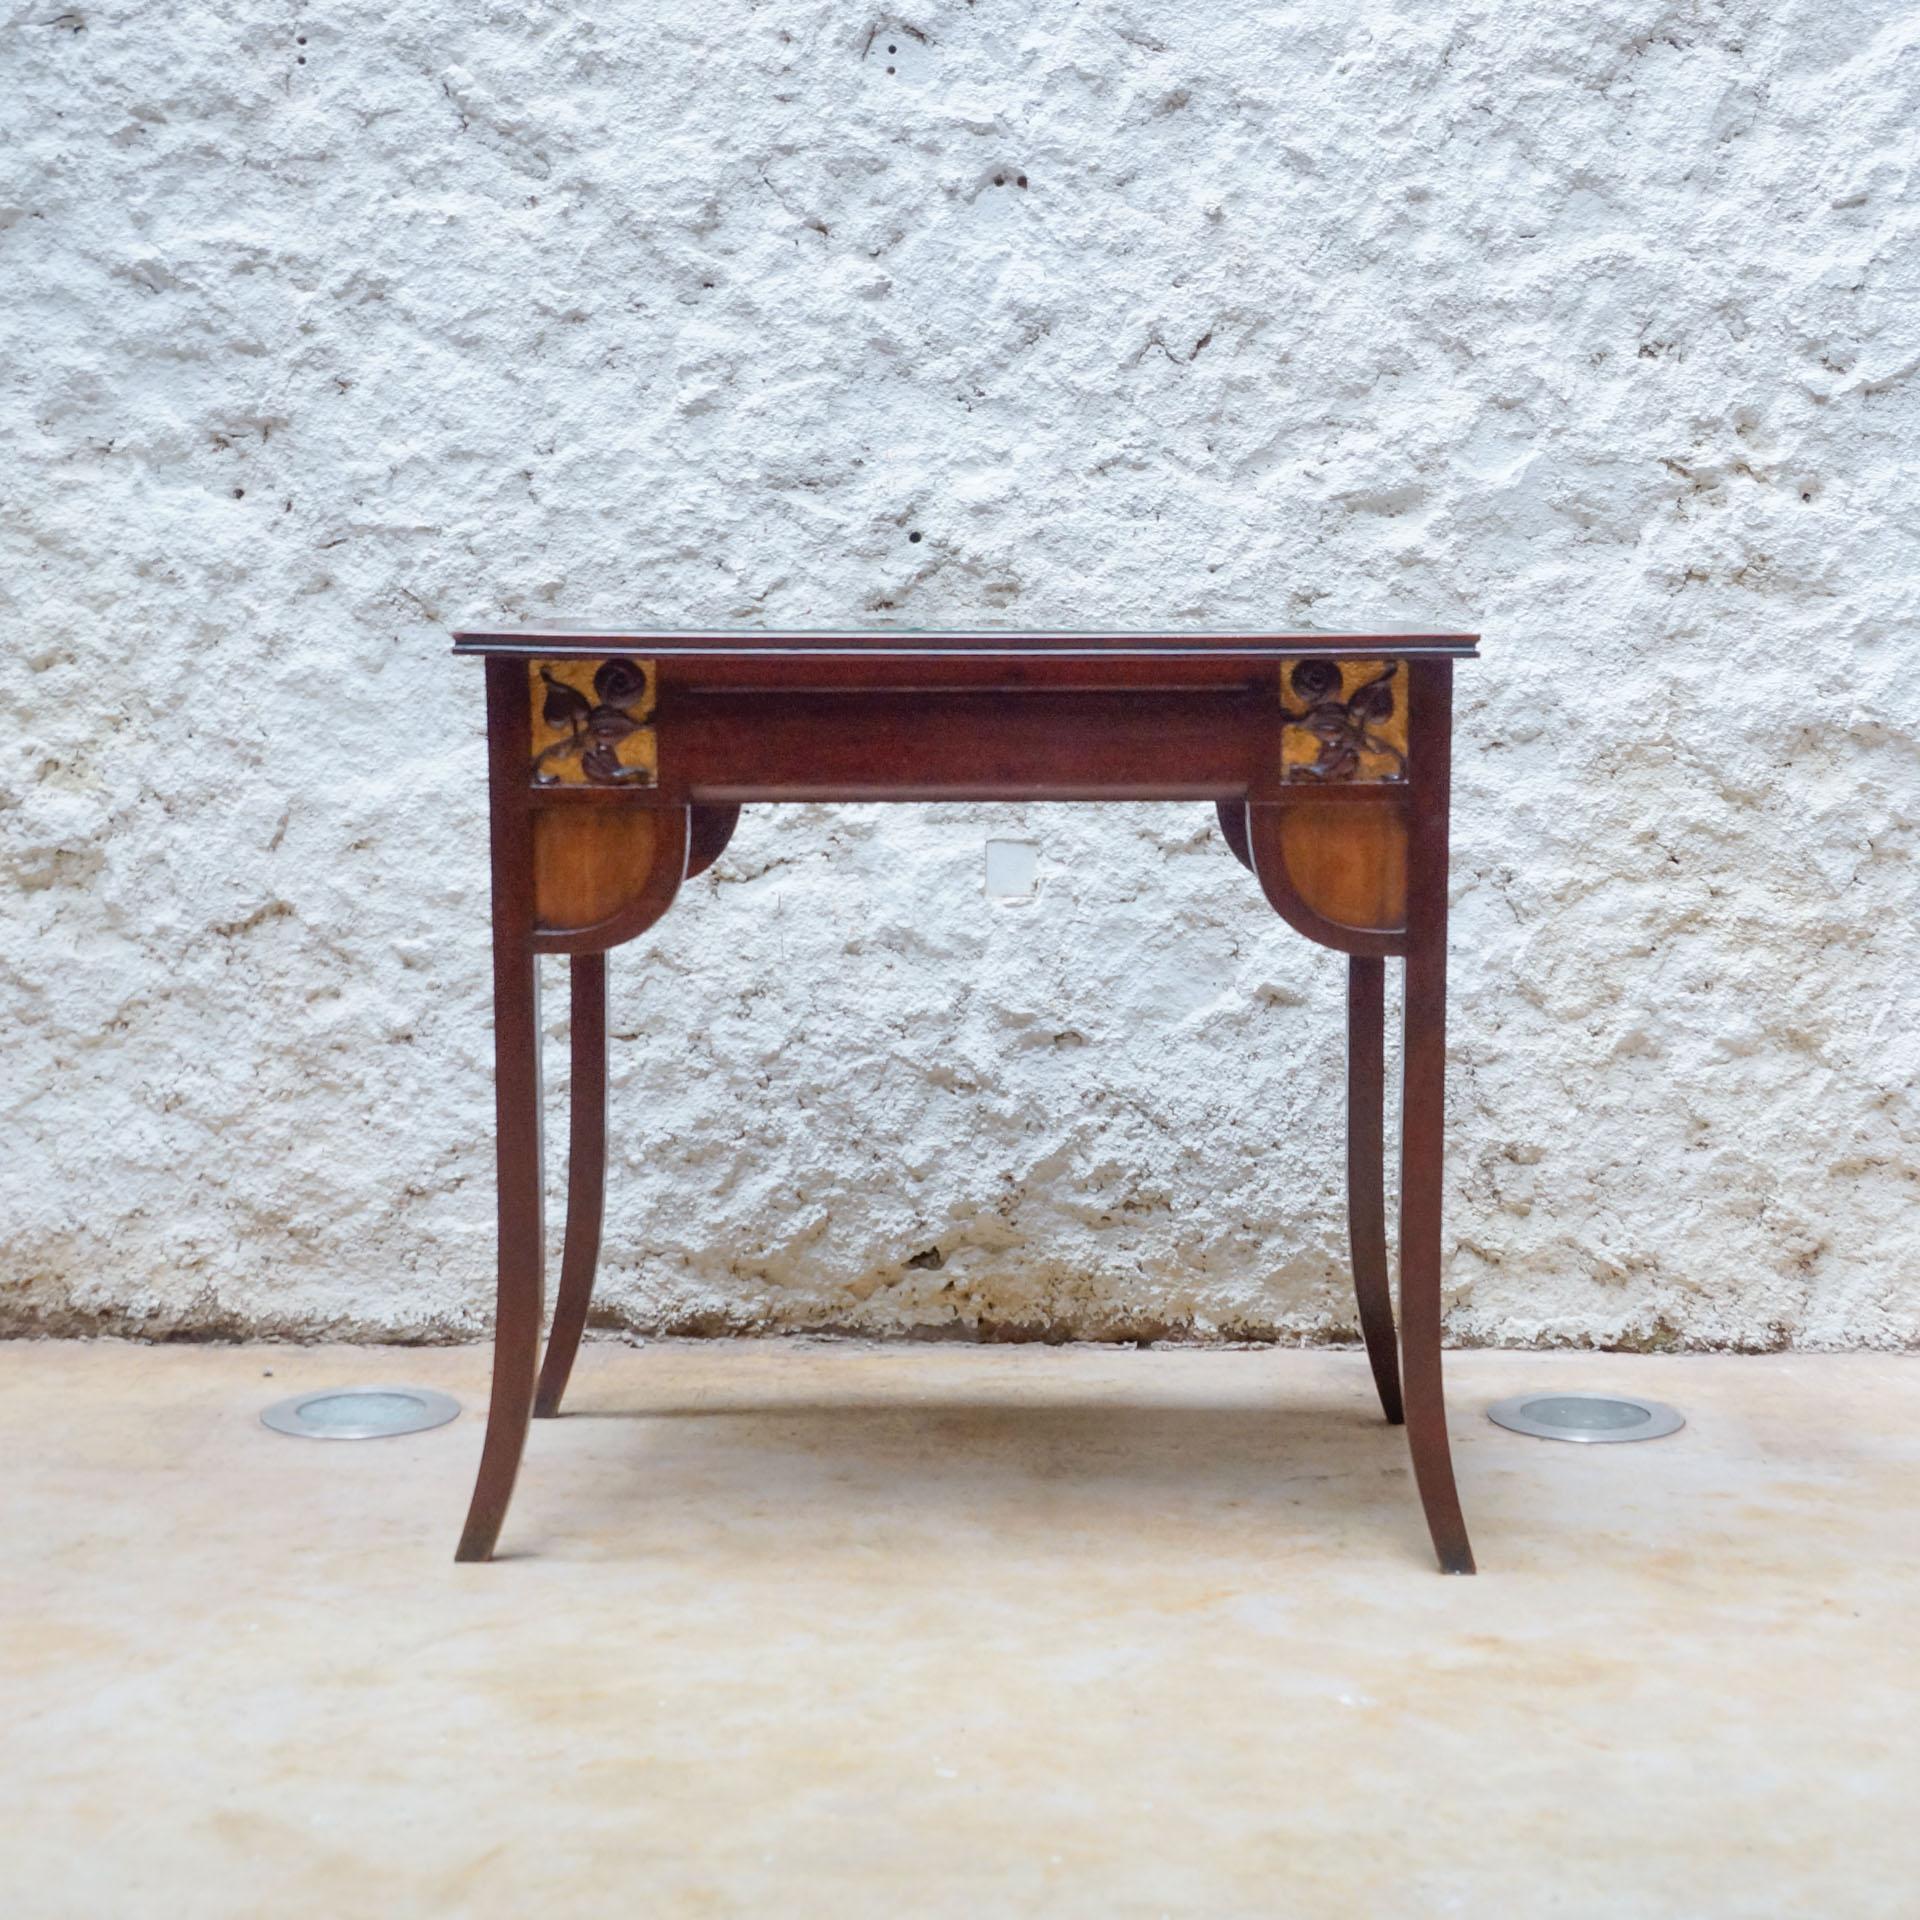 Modernist wood table with upholstered top, circa Early 20th Century.
By unknown manufacturer from Spain.

In original condition, with minor wear consistent with age and use, preserving a beautiful patina.

Material:
Wood
Fabric

Dimensions:
 D 55 cm